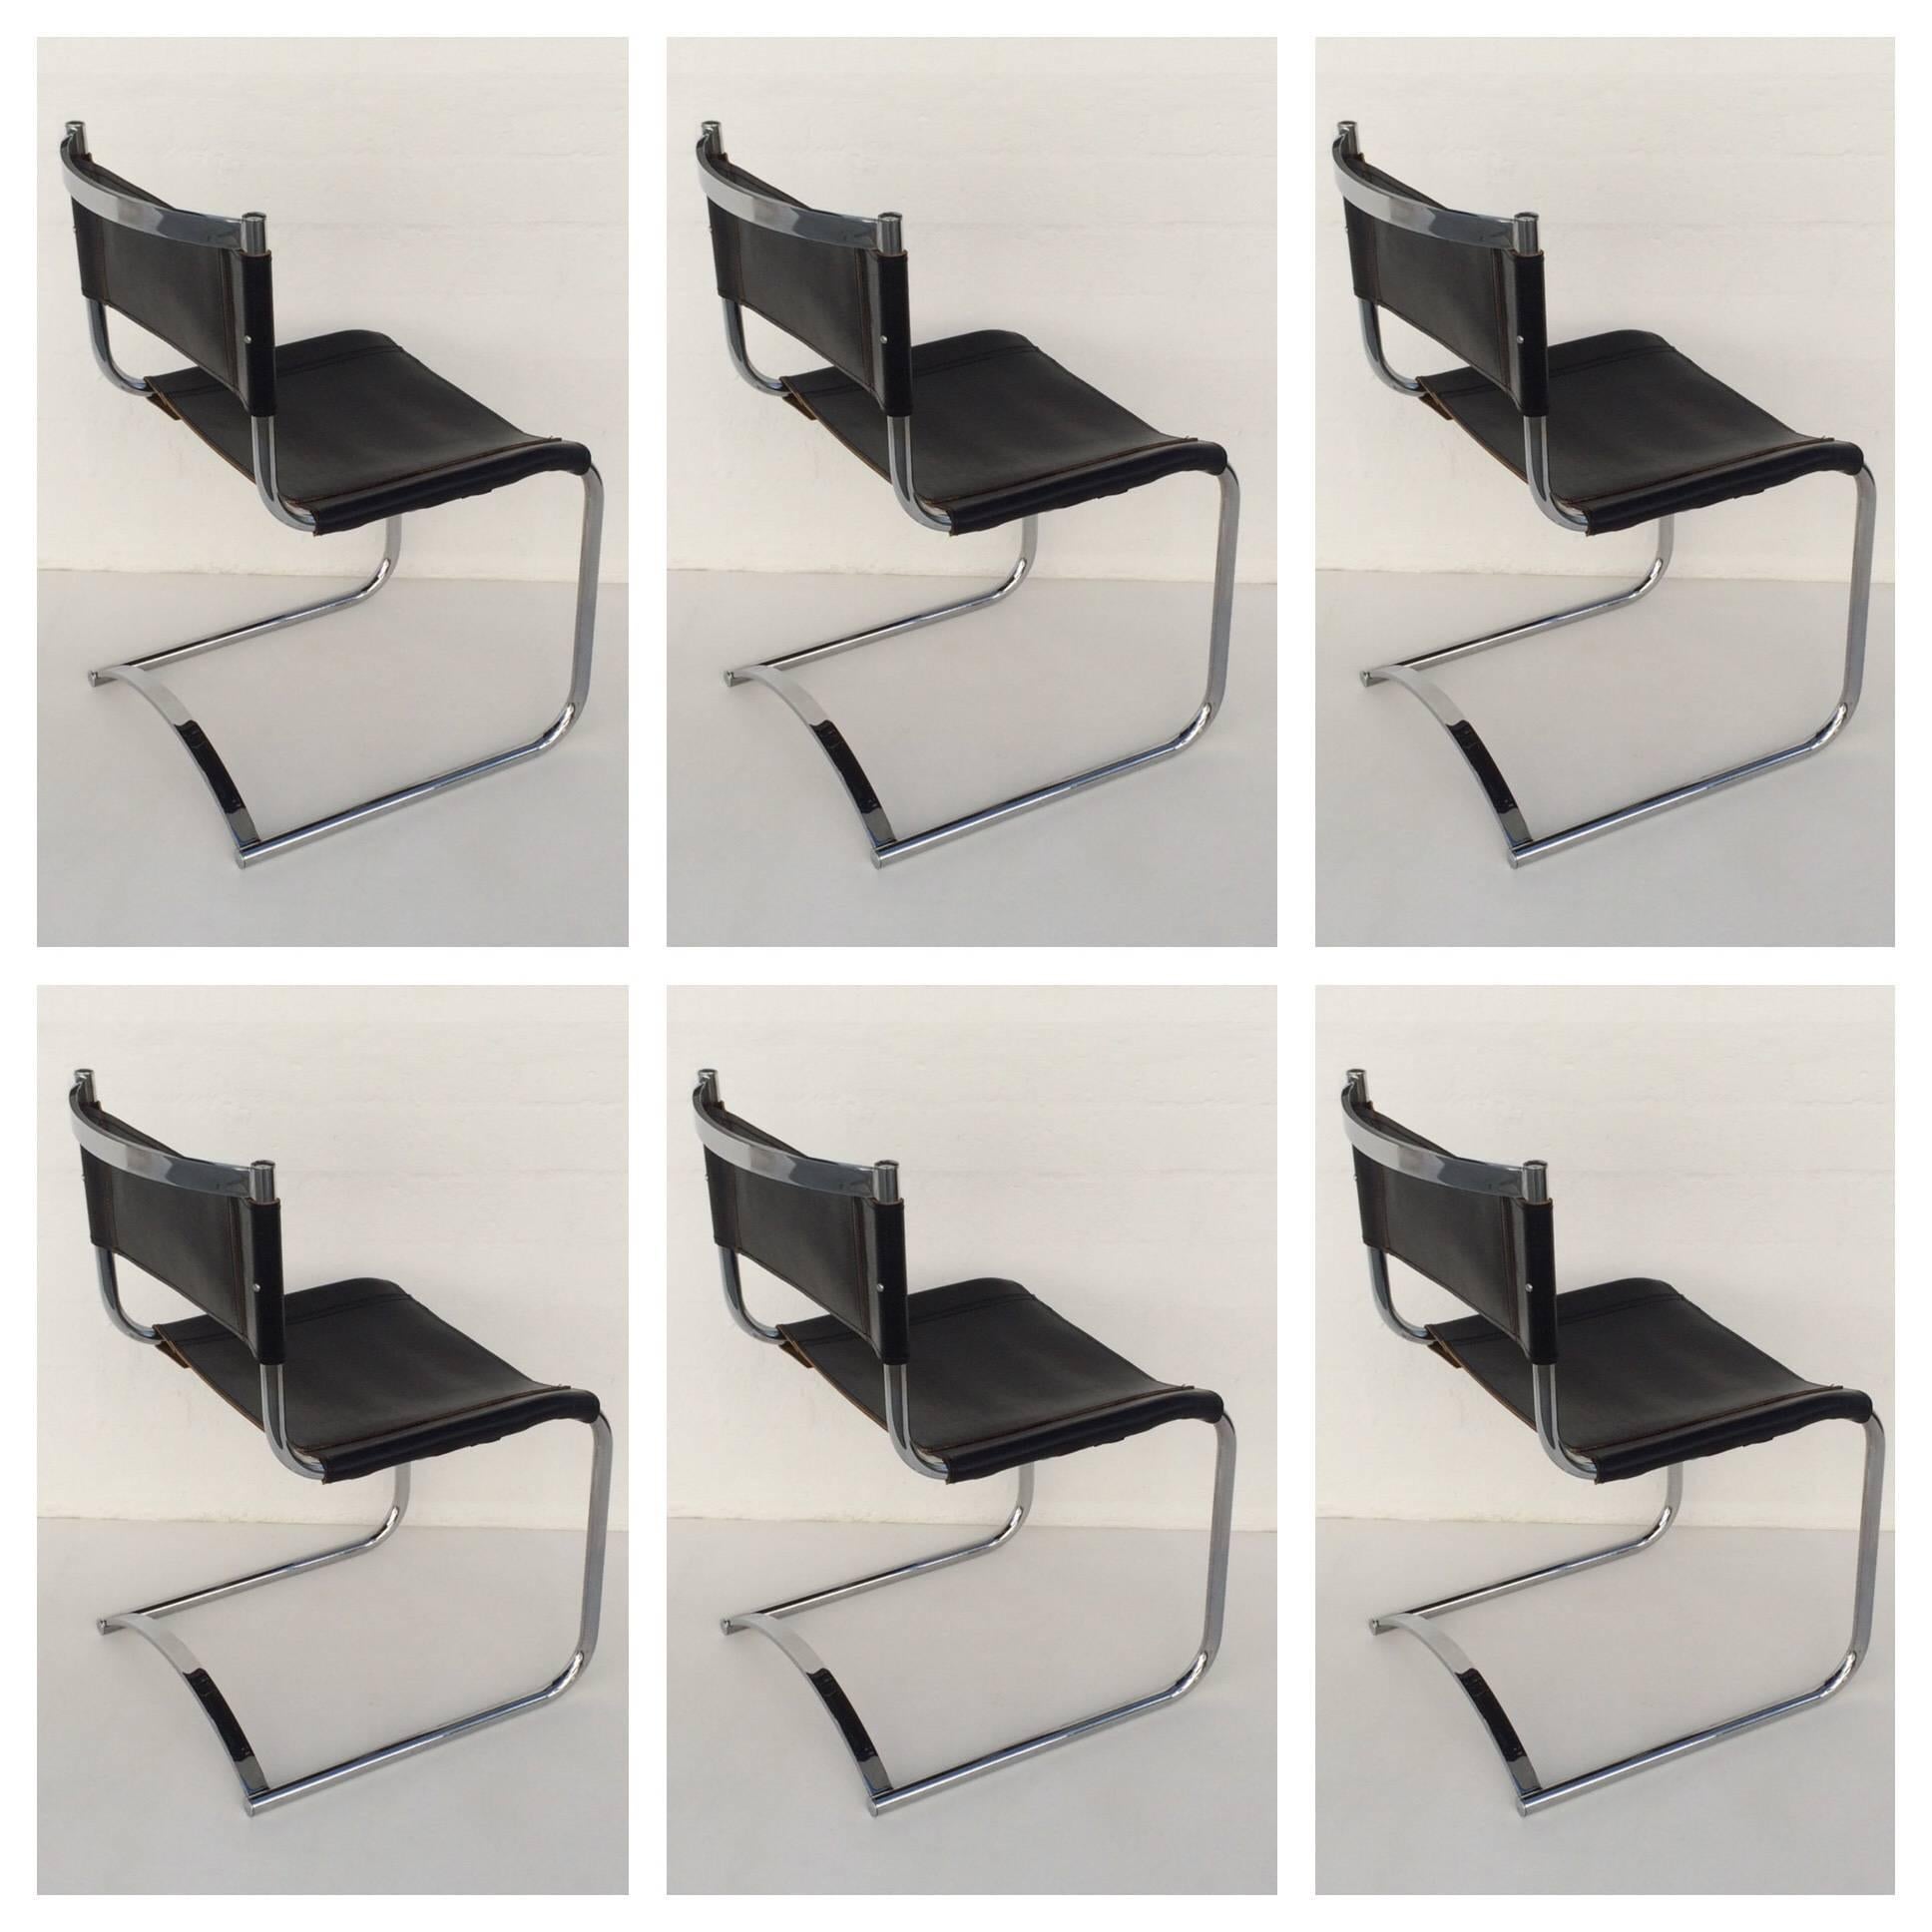 Rare set of six polished chrome and black saddle leather dining chairs designed by Cy Mann.